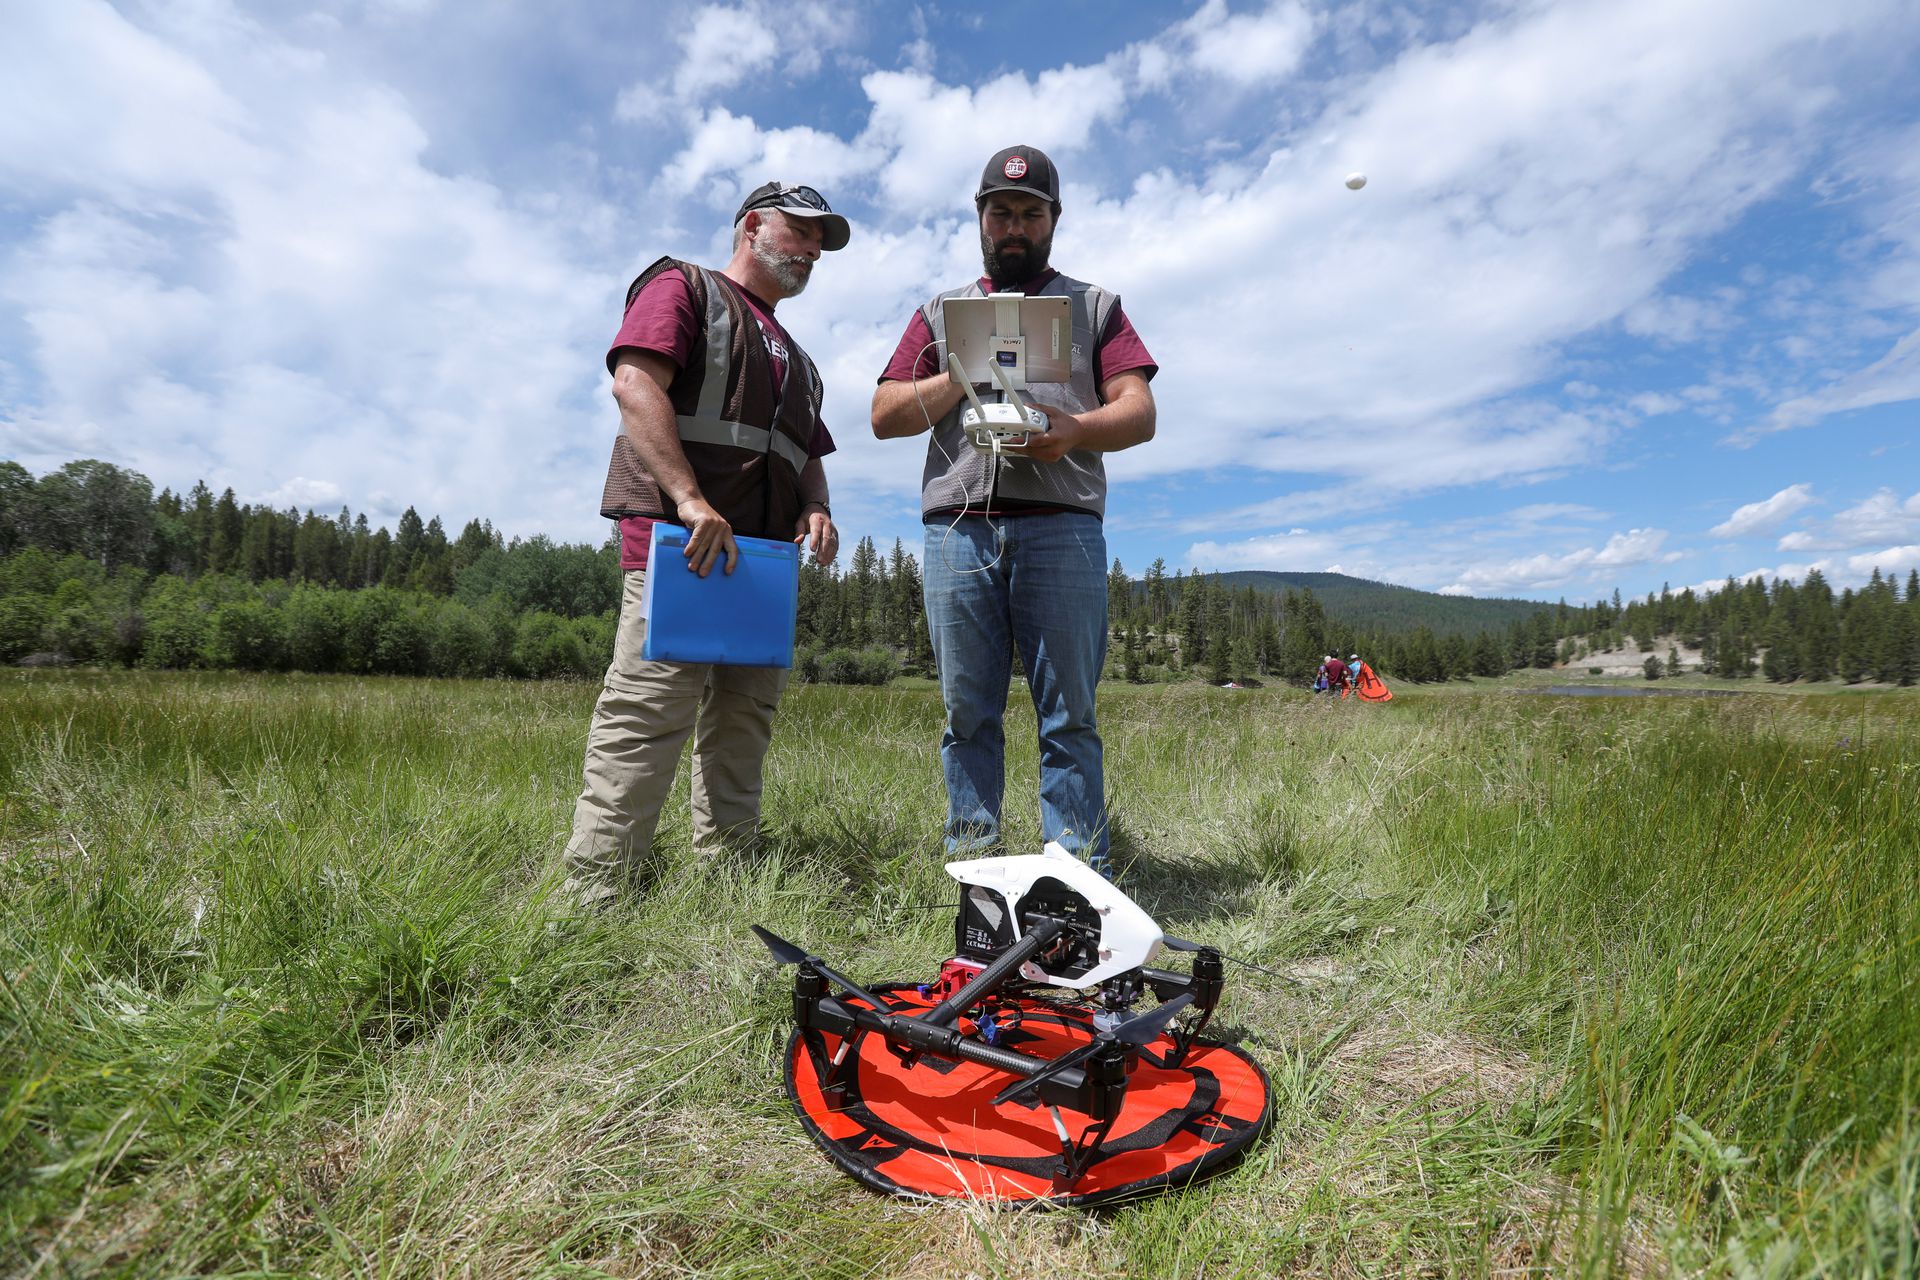 Reuters' Story Highlights How ASSURE, WiBotic and University of Montana Collaborate to Upgrade UAS Battery Power, Recharging Technology to Use Drones to Help Fight Wildfires